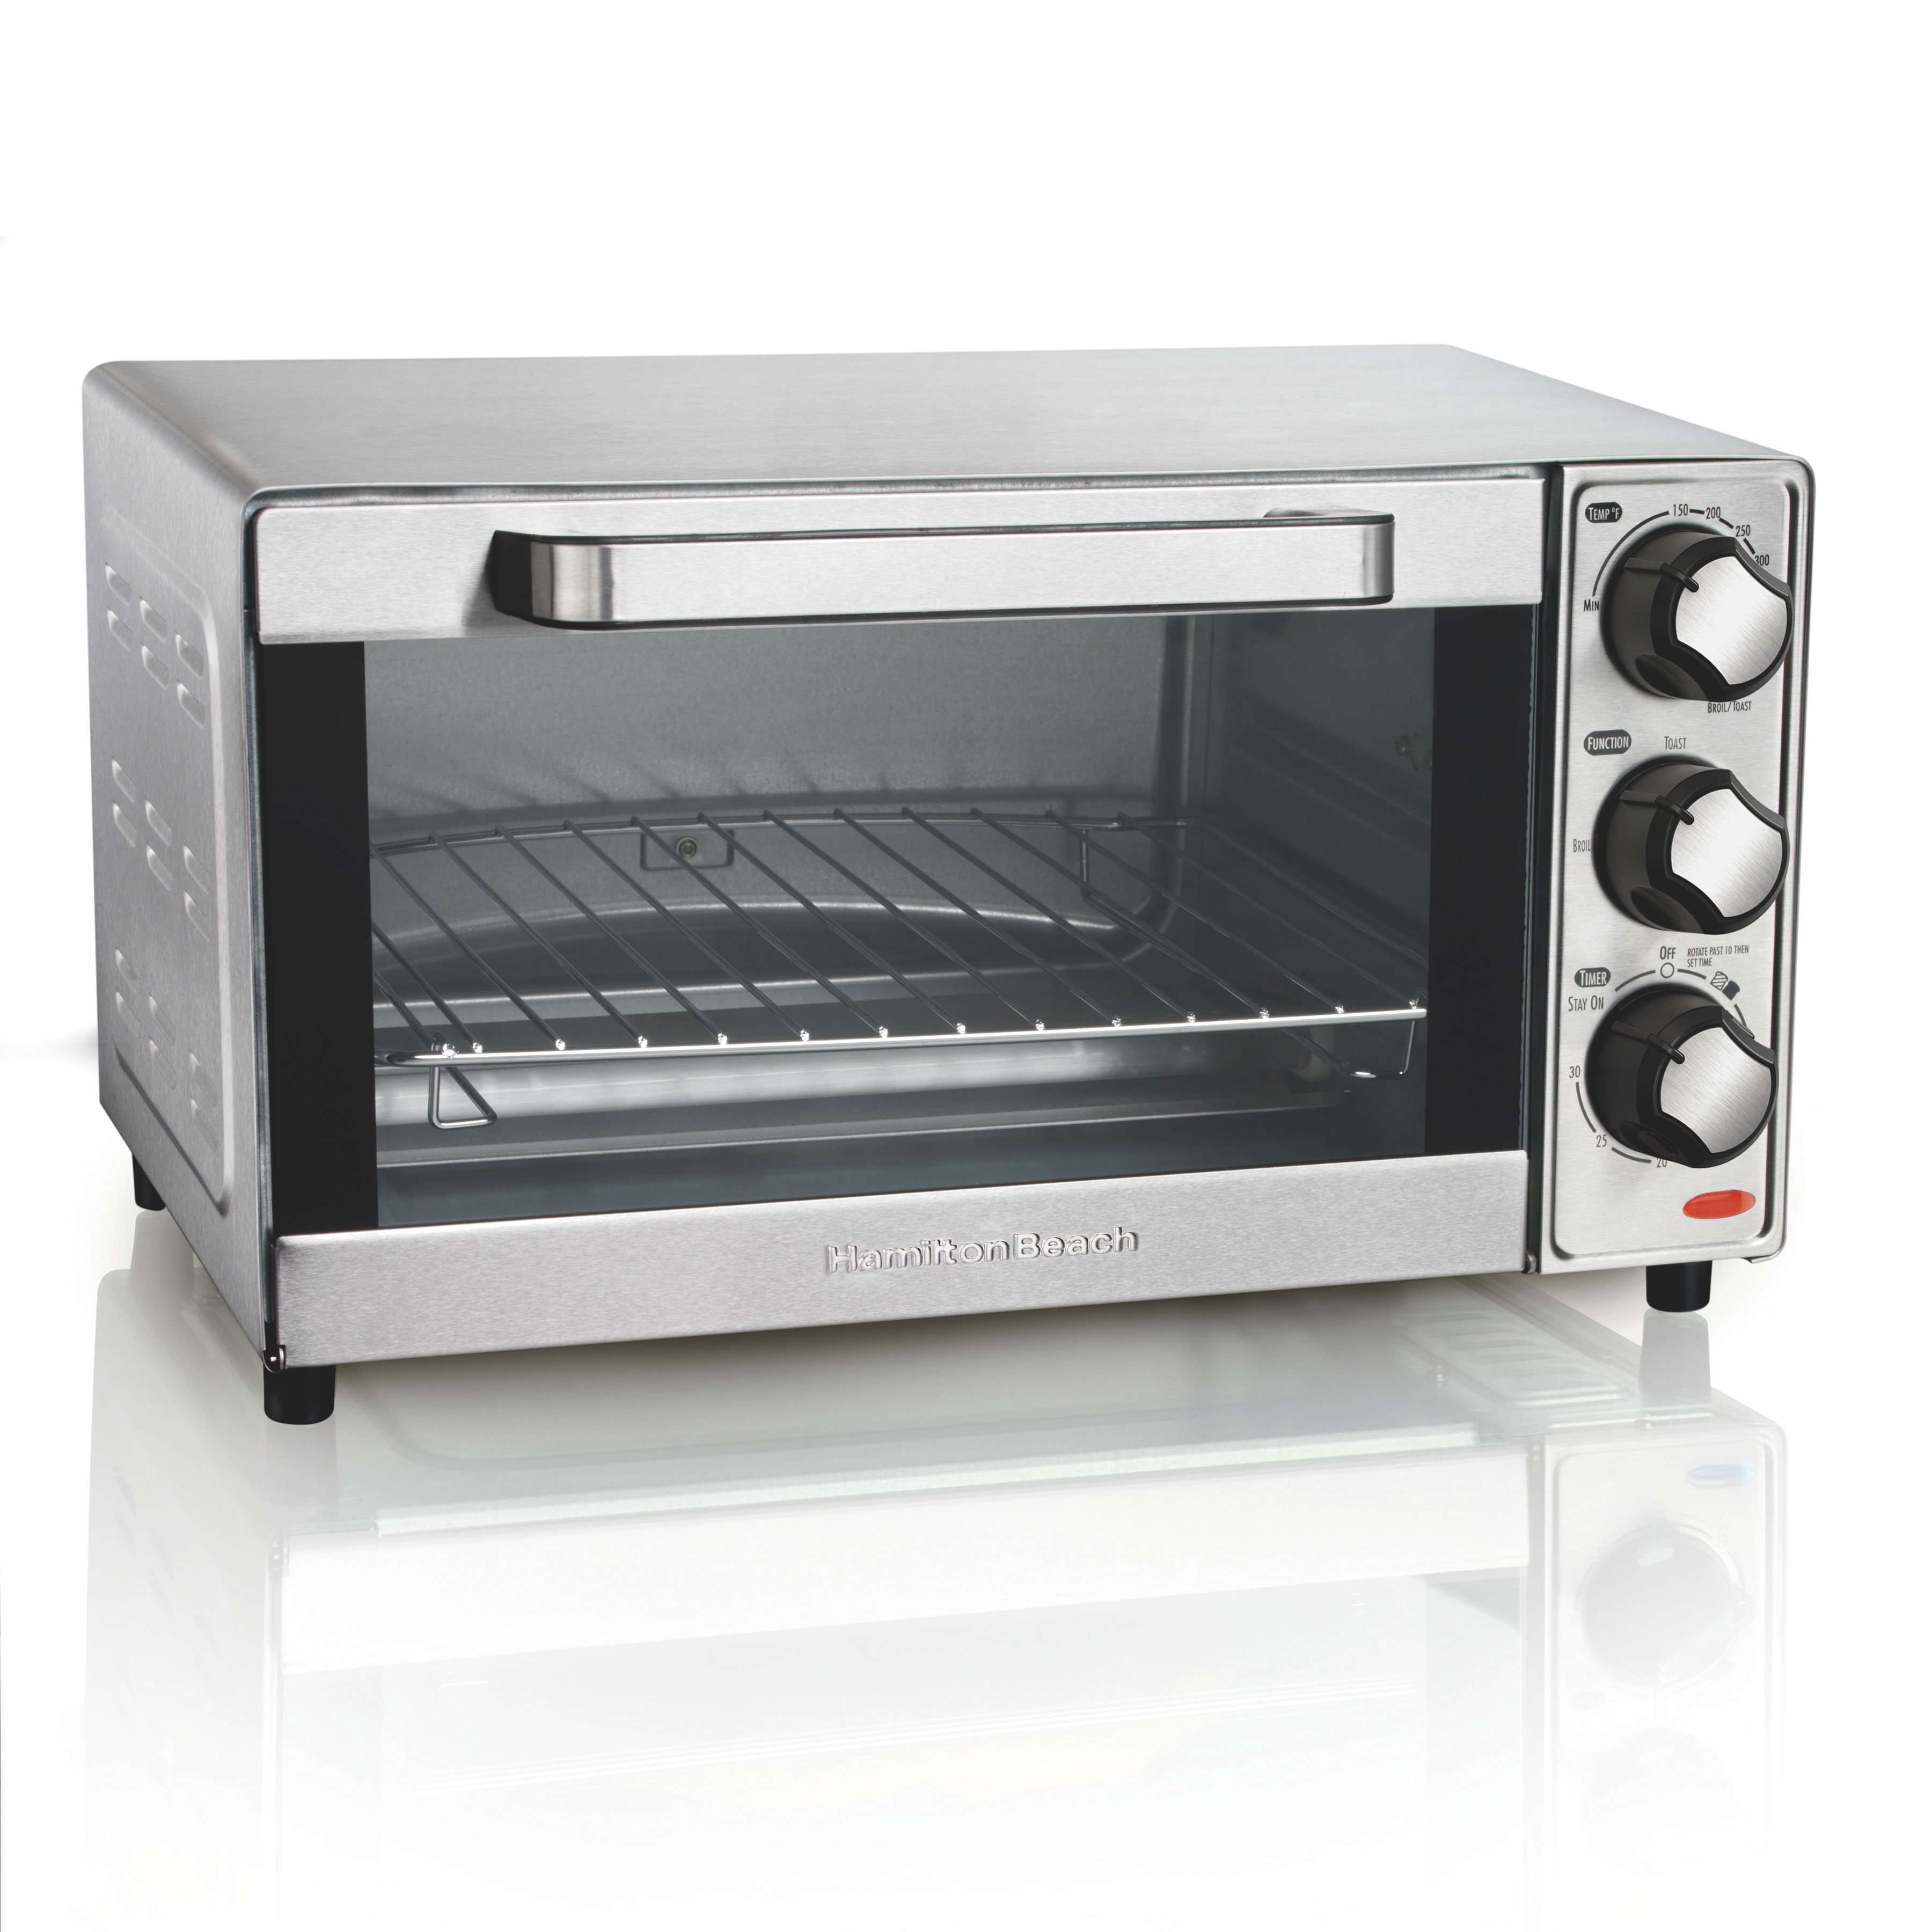 Toastation 1300 W 2-Slice Black and Gray Toaster Oven with Top